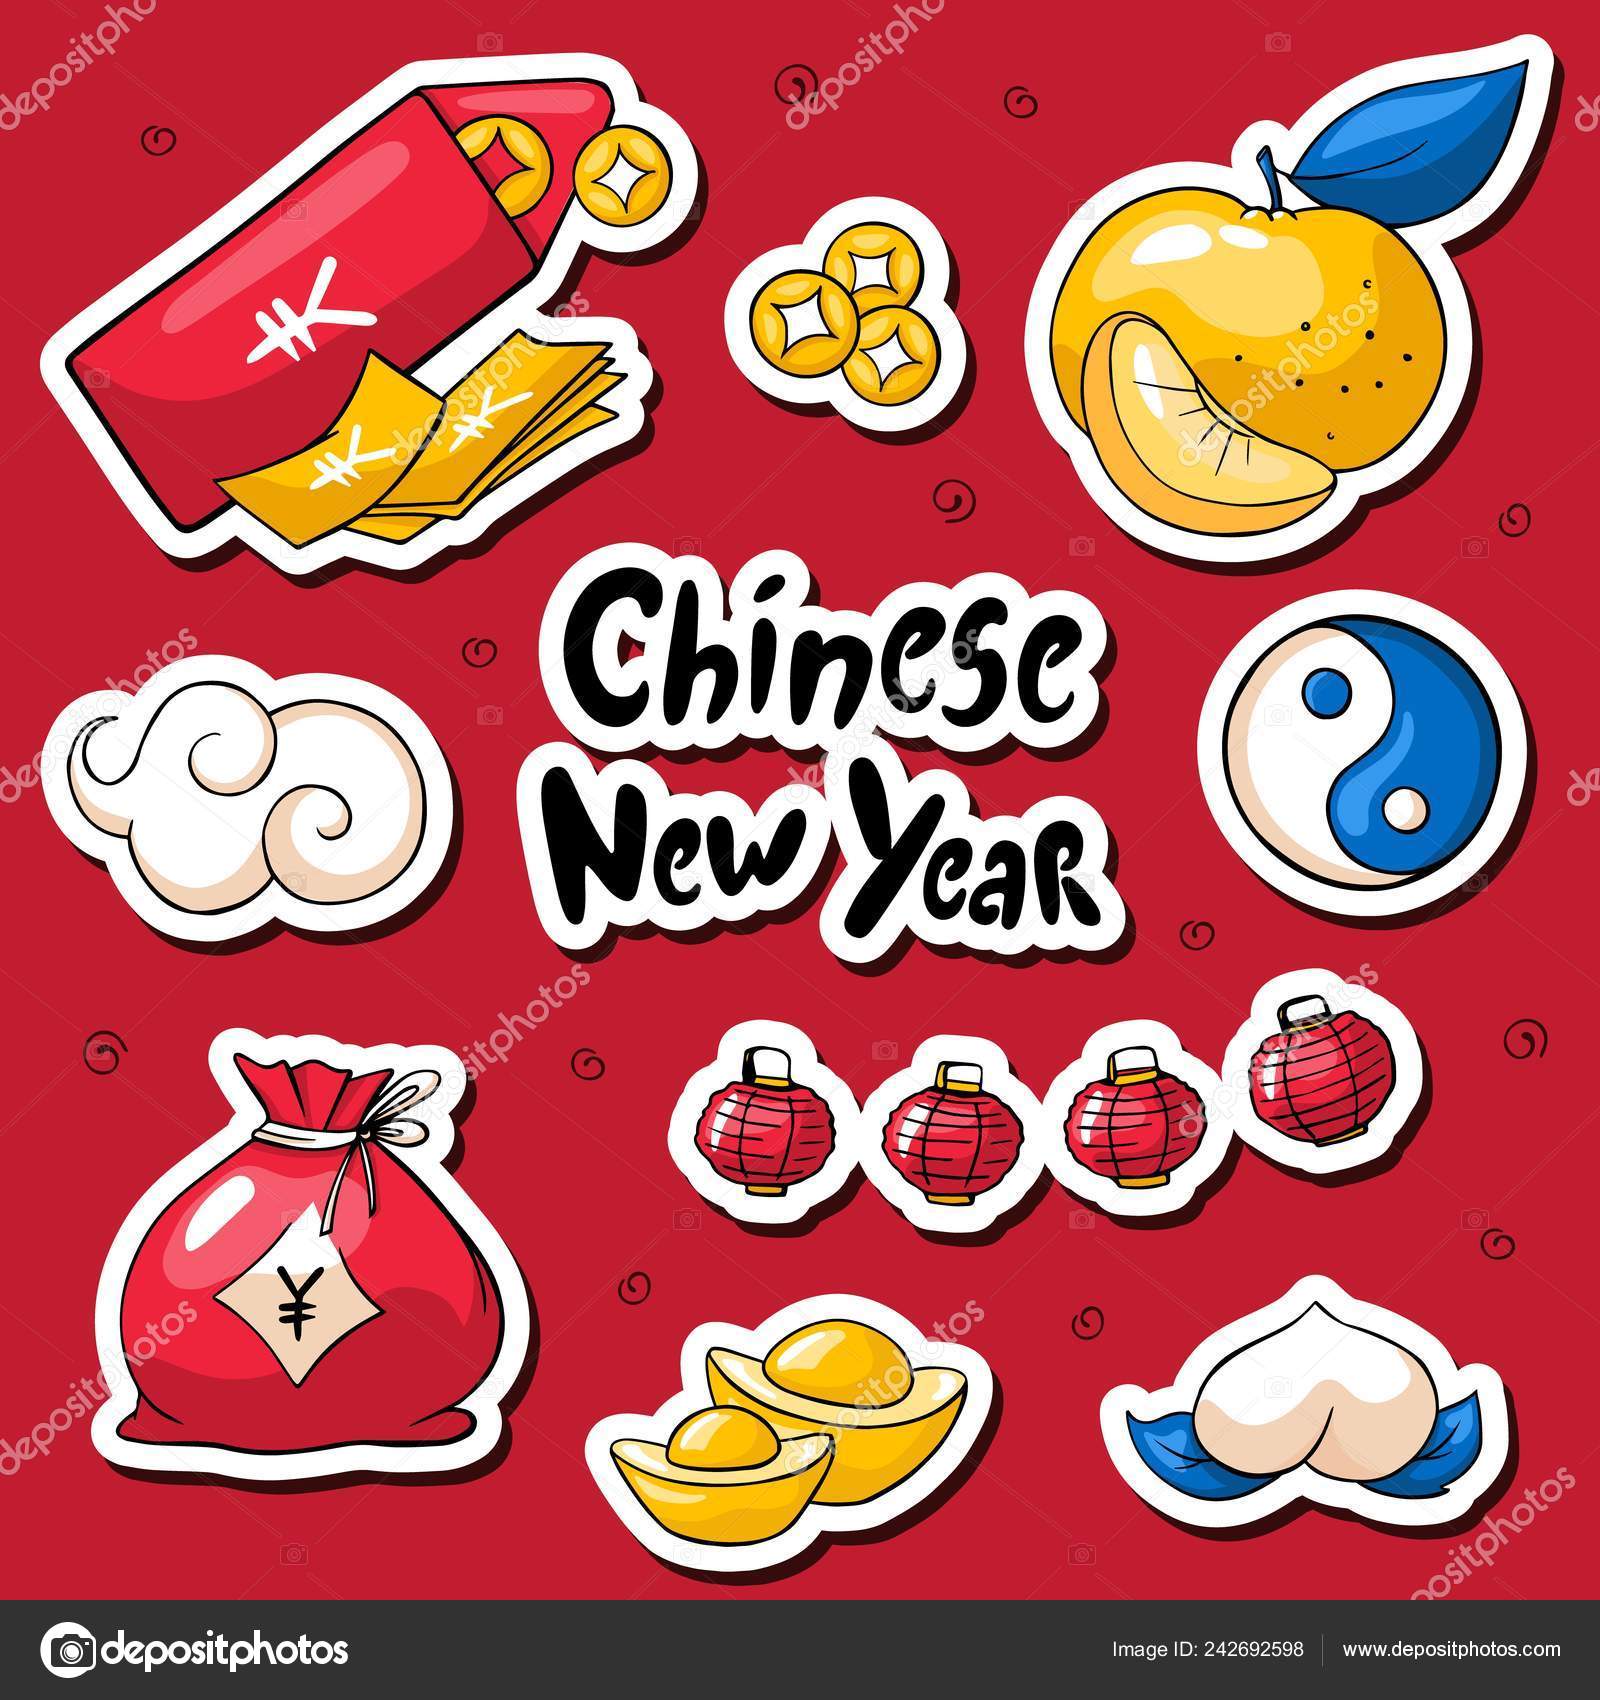 Vector seamless pattern. Concept chinese new year and red chinese envelope.  Hand drawing lanterns, clouds, coins and other traditional elements. Chinese  festival illustration. Stock Vector